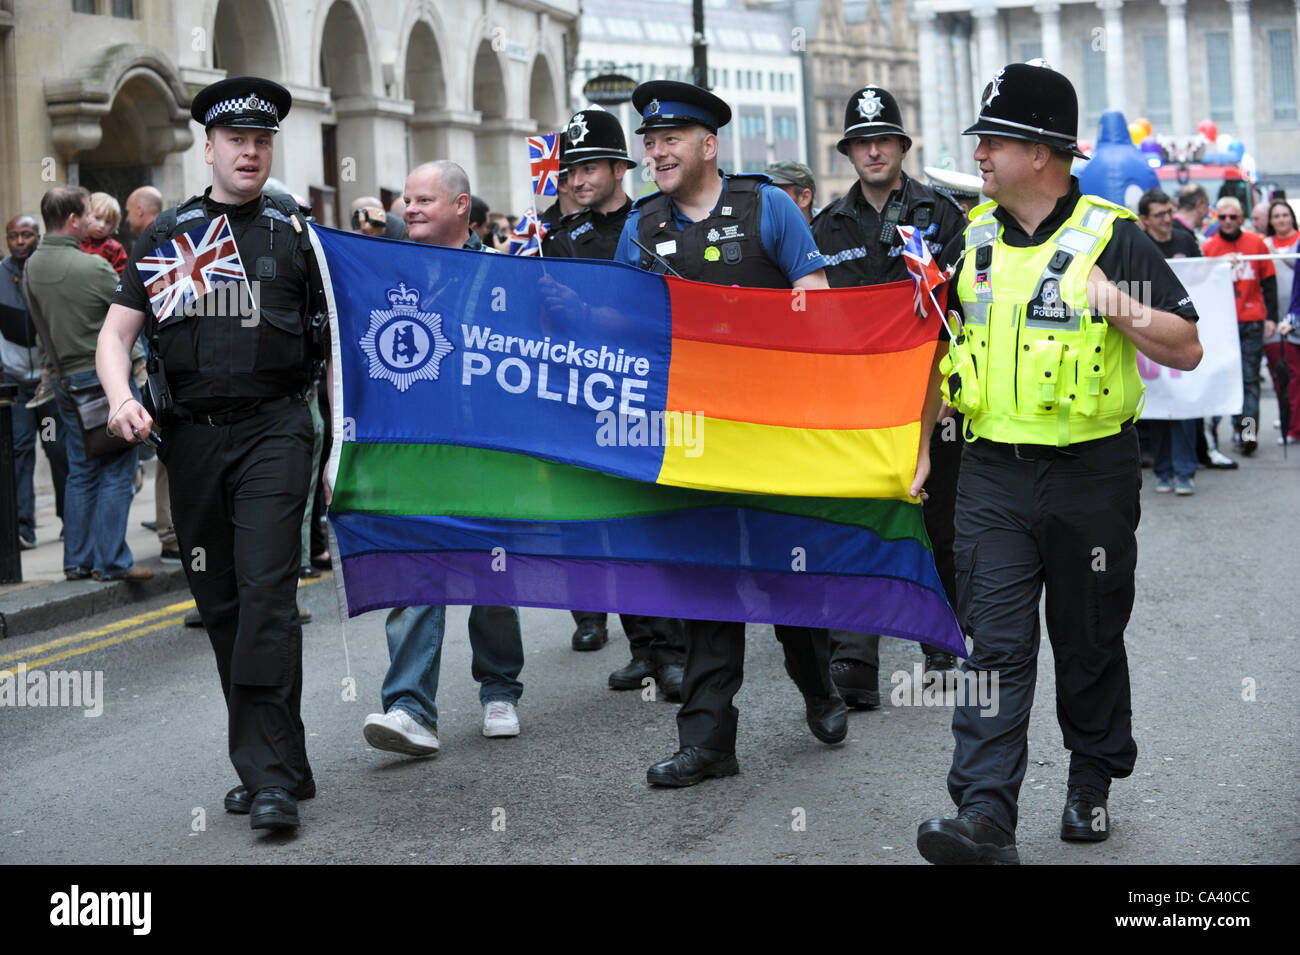 warwickshire-police-officers-with-a-gay-rainbow-flag-marching-to-celebrate-CA40CC.jpg